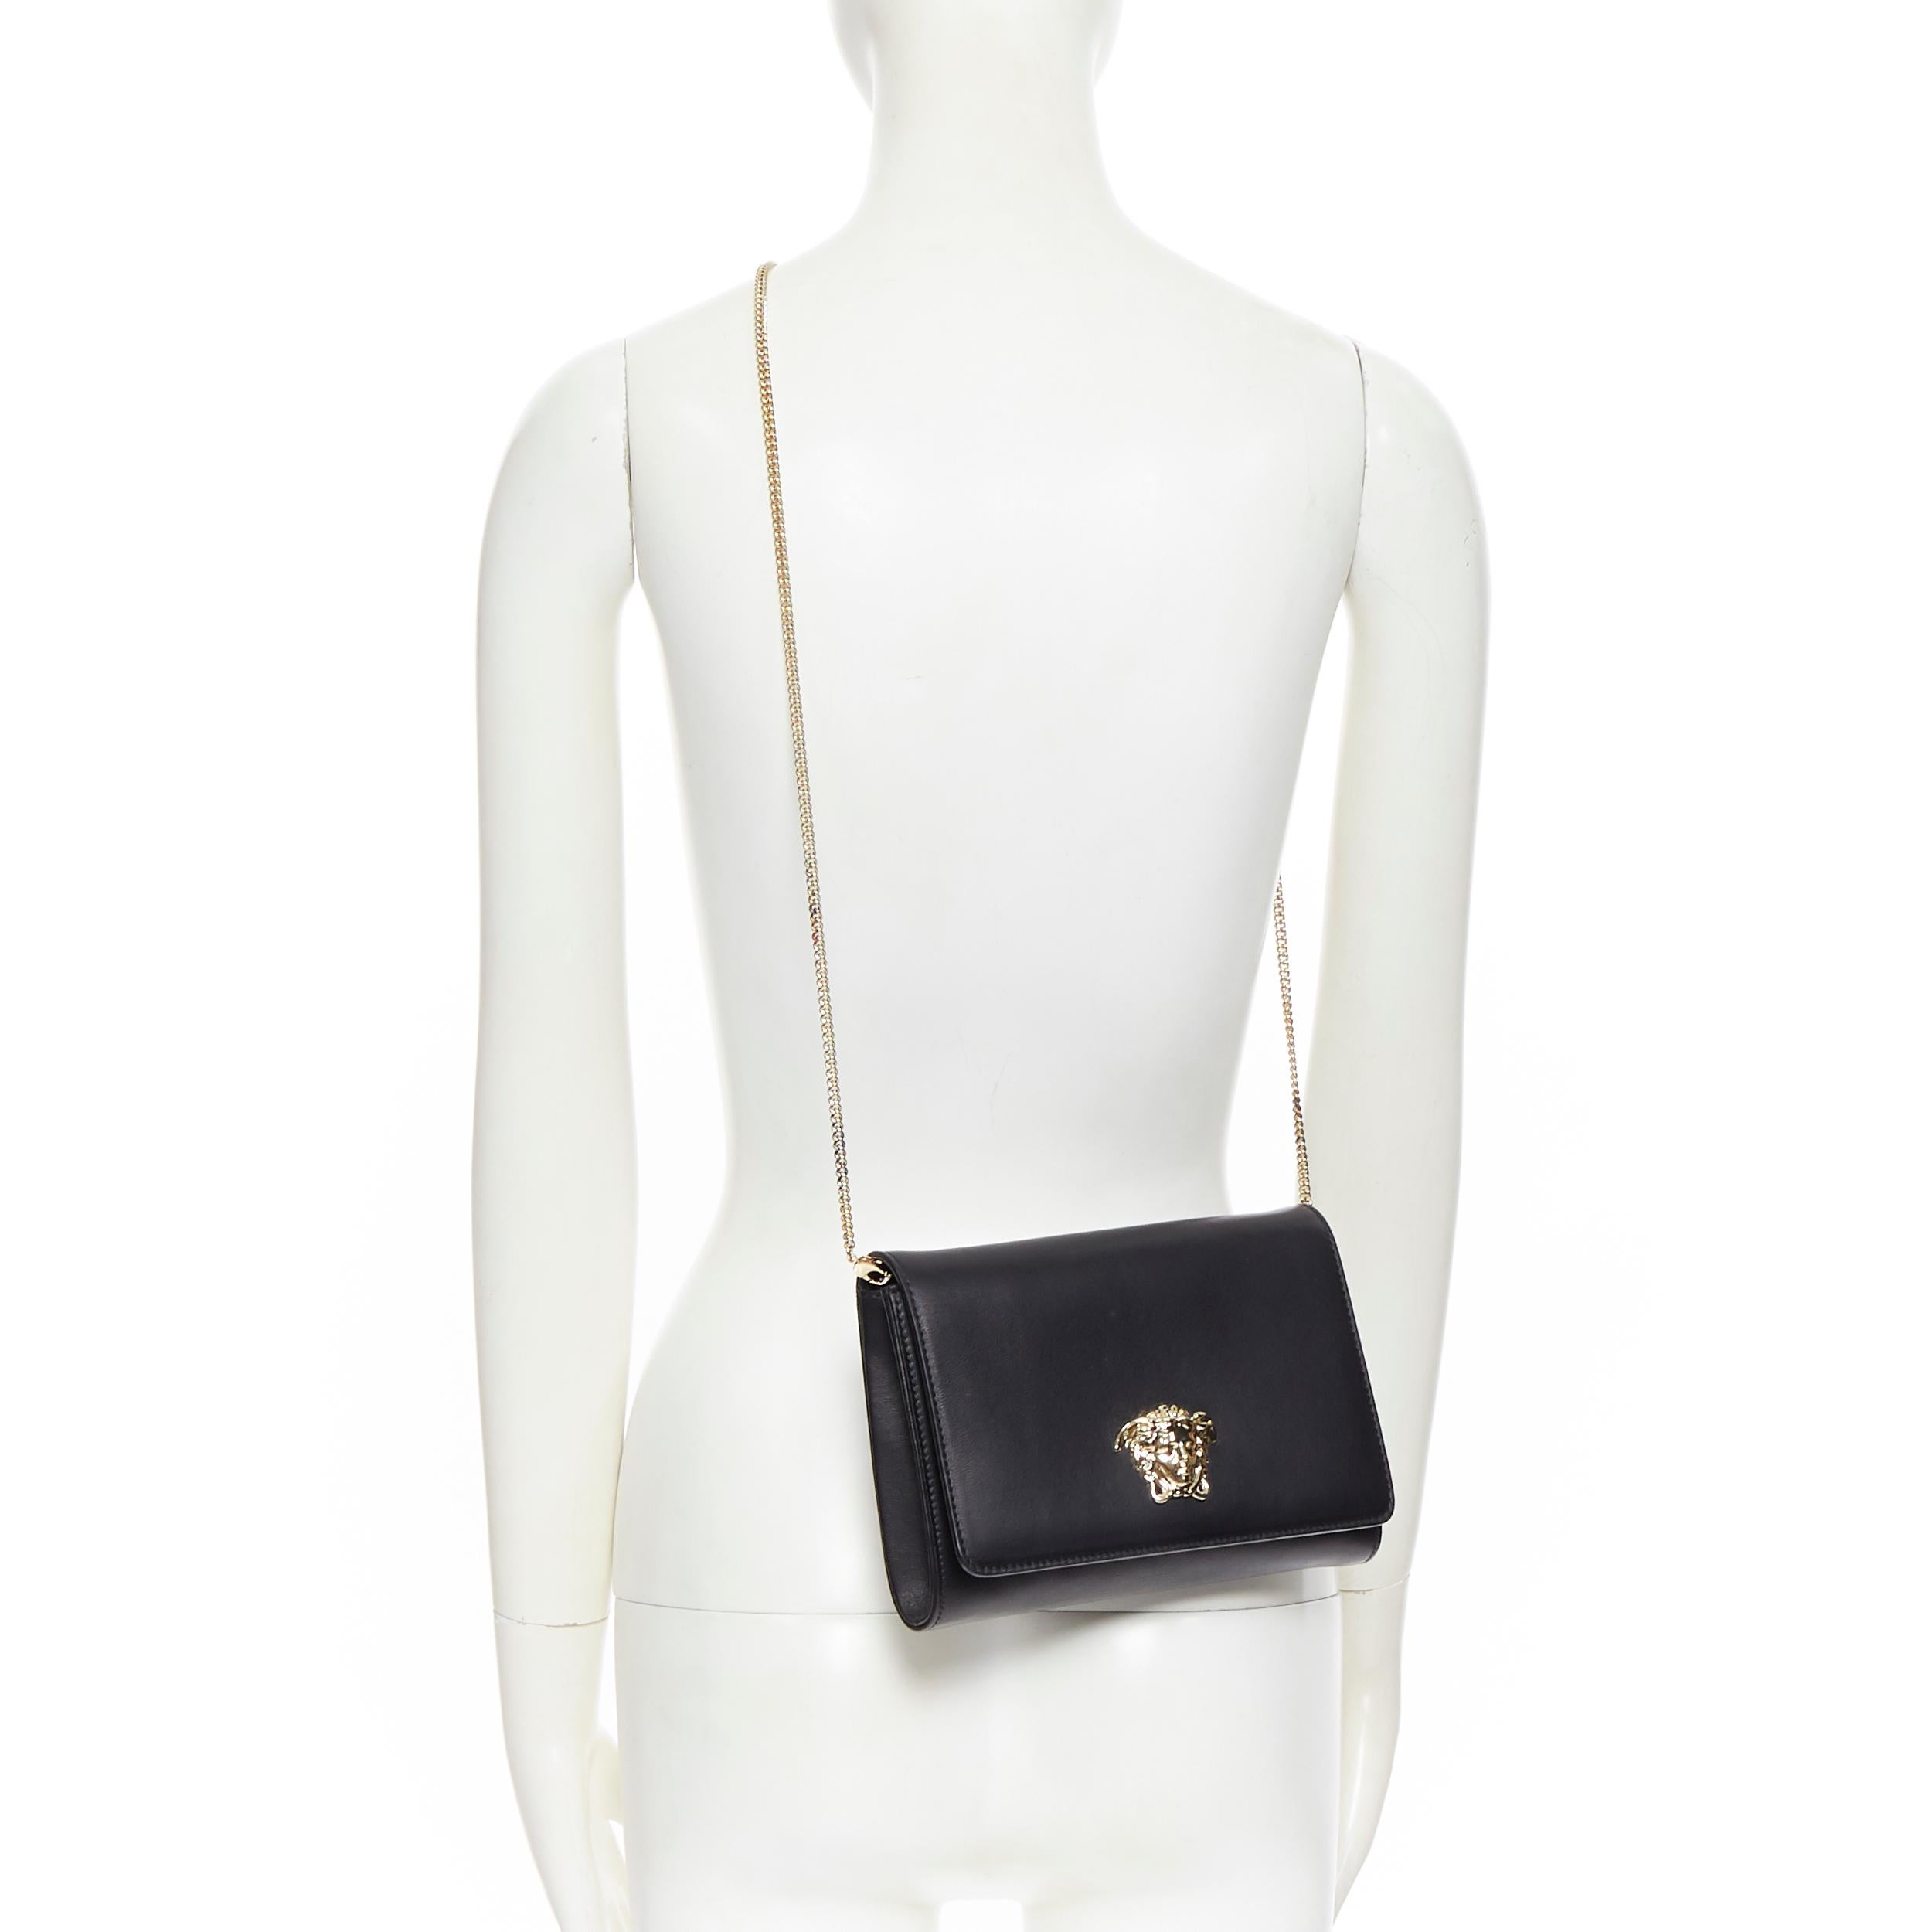 new VERSACE Palazzo Medusa silver face black leather flap shoulder chain bag
Brand: Versace
Designer: Donatella Versace
Model Name / Style: Palazzo Medusa flap
Material: Leather
Color: Black
Pattern: Solid
Closure: Magnetic
Extra Detail: Signature